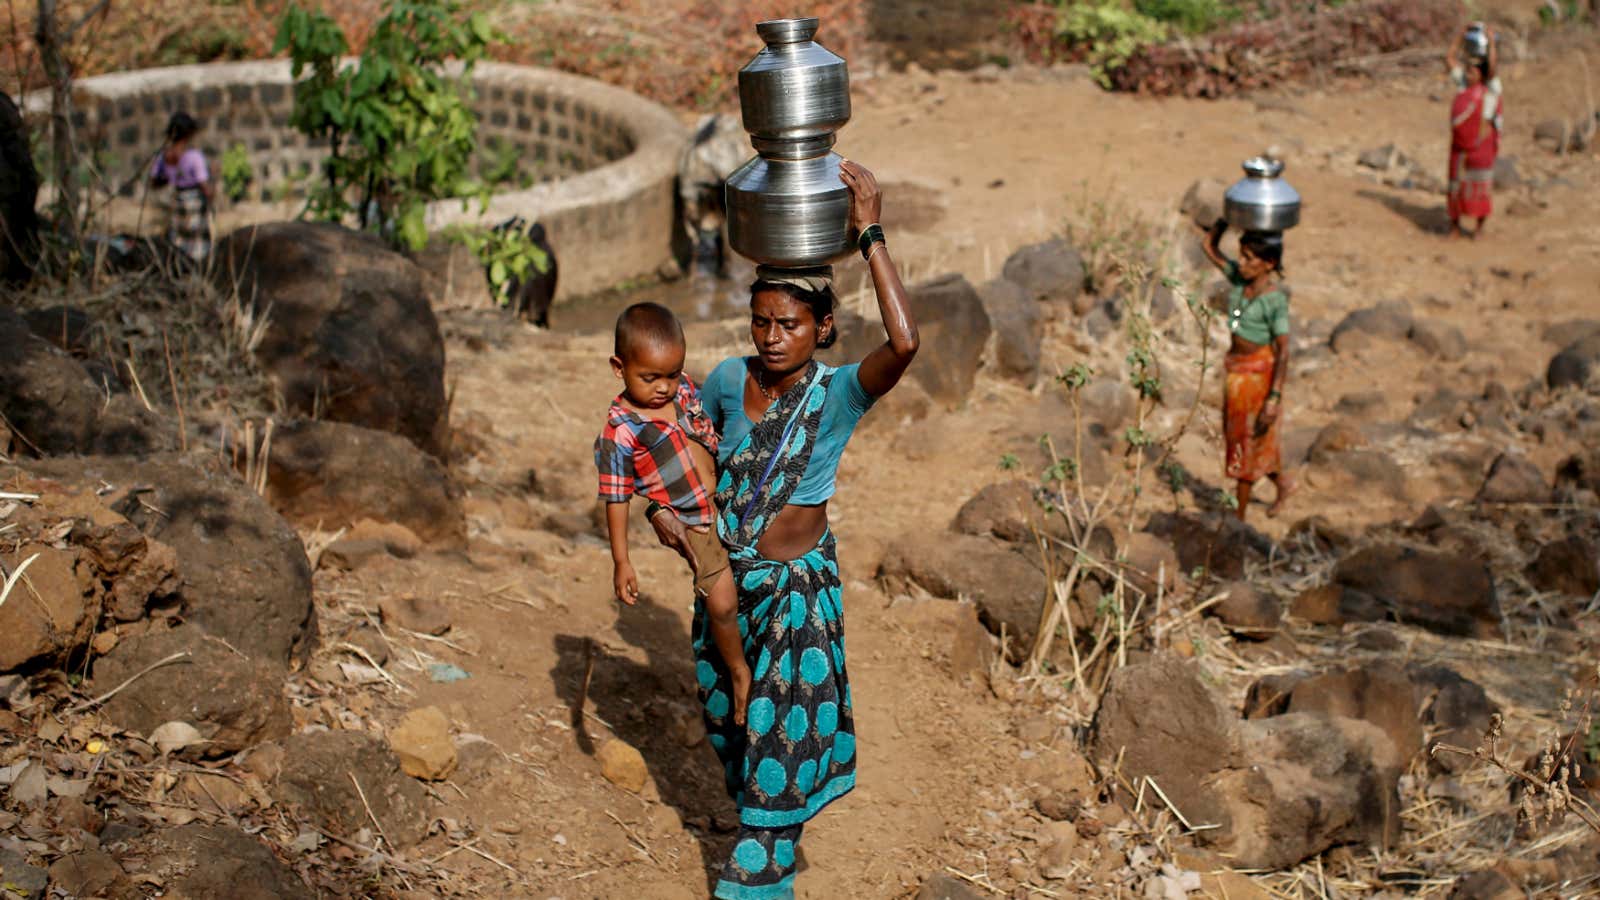 There are many without access to drinking water.